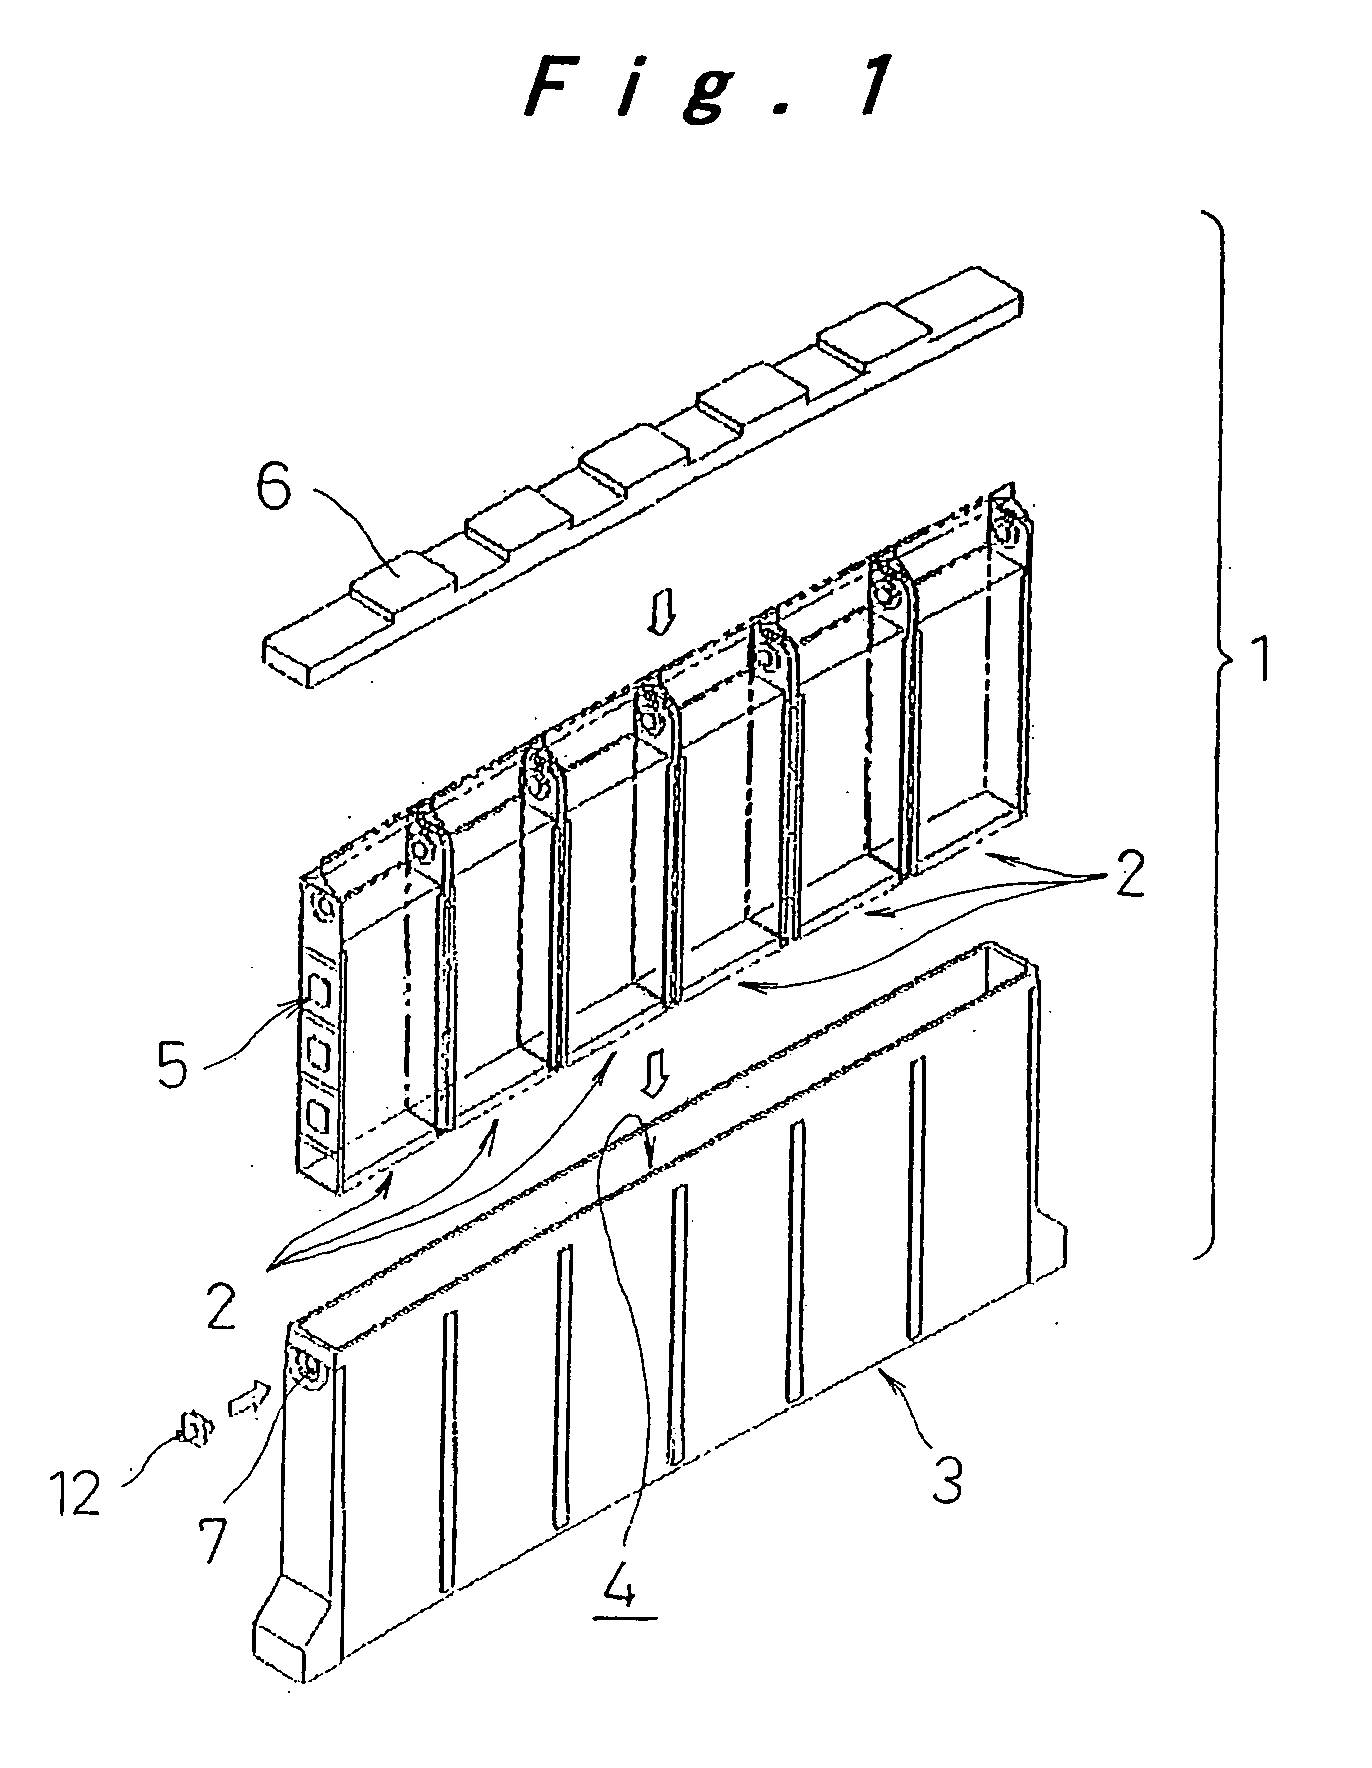 Cell, connected-cell body, and battery module using the same